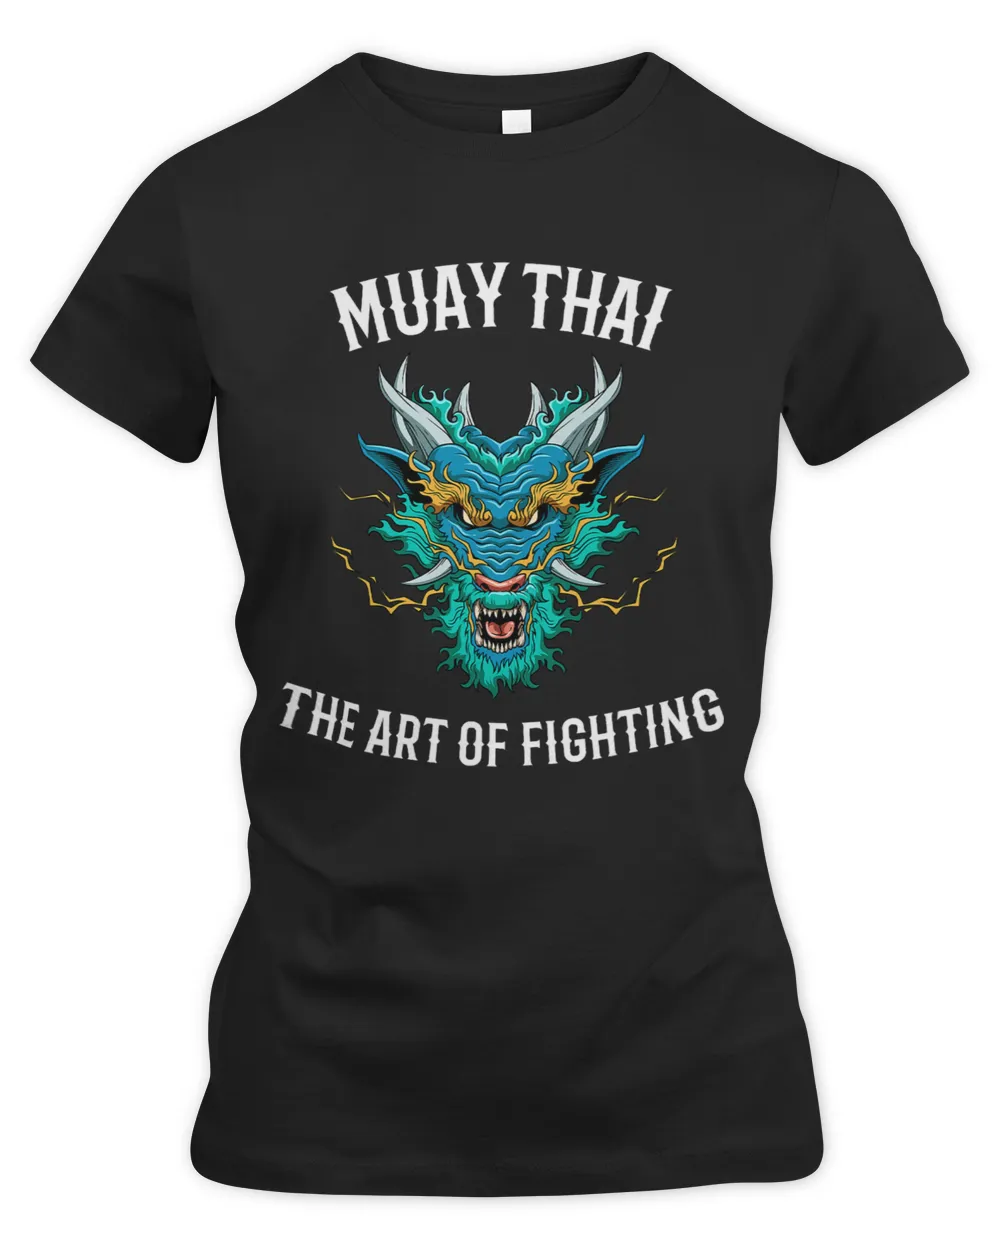 Funny Boxing Muay Thai and Thai Boxing Strong Asian Dragon